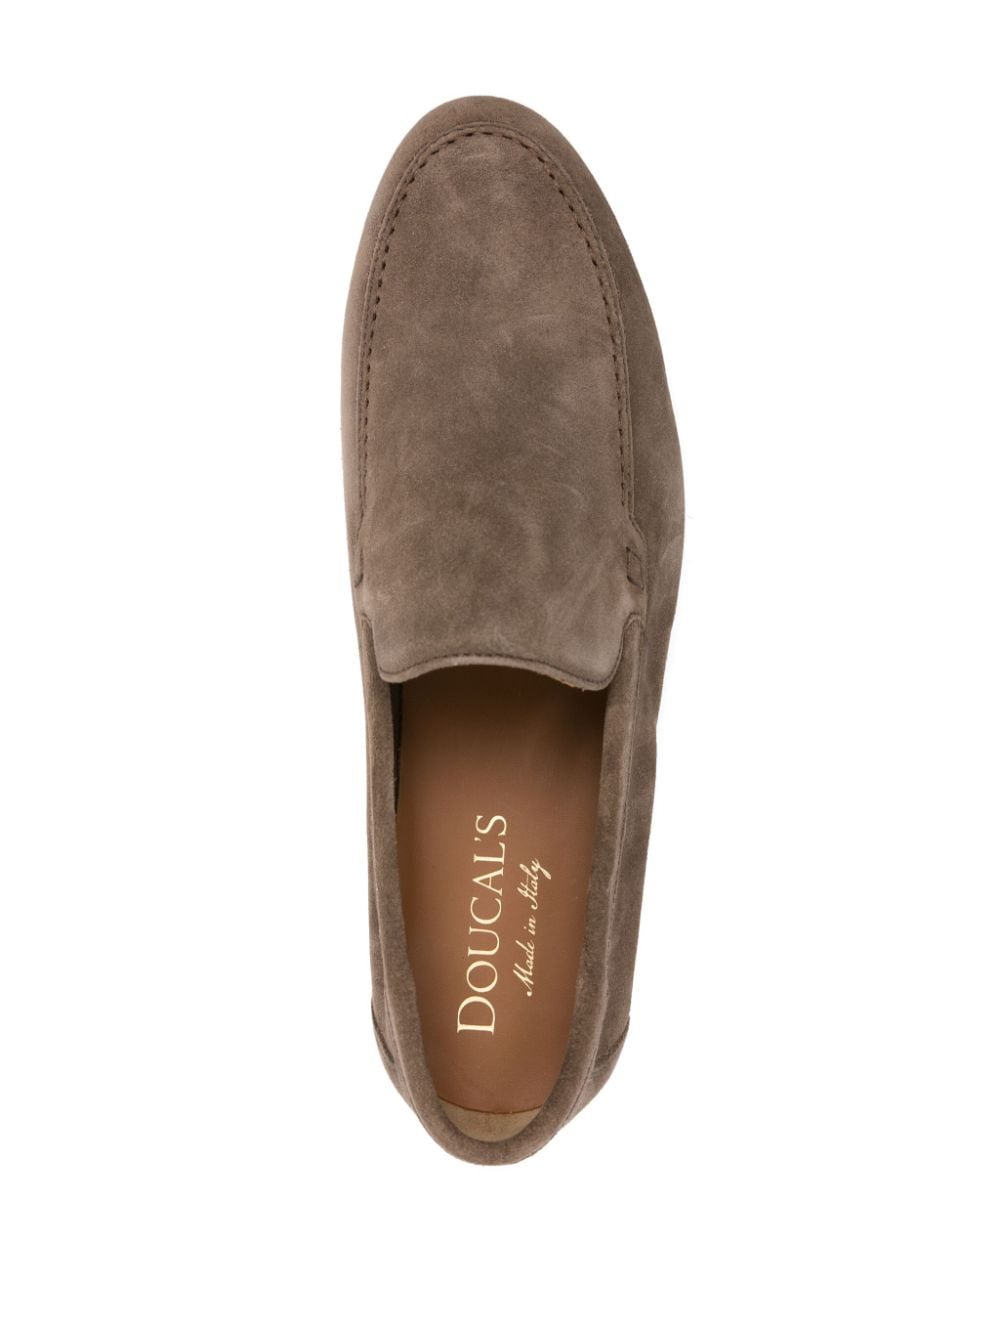 Coffee suede moccasin